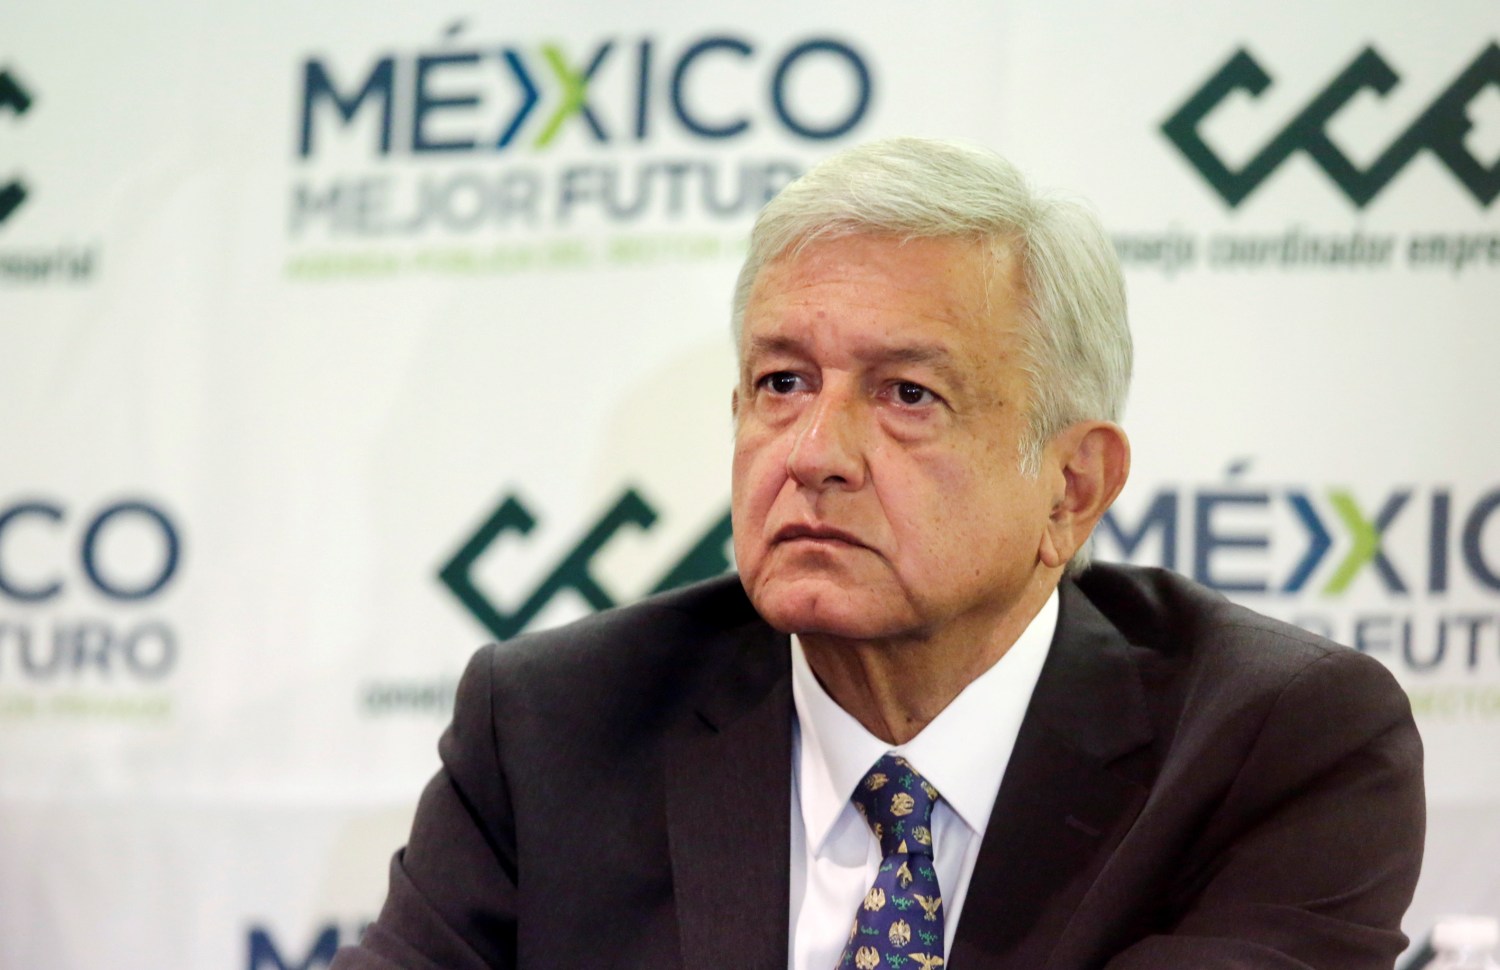 Mexico's President-elect Andres Manuel Lopez Obrador looks on during a news conference after a meeting with the Business Coordinating Council (CCE) in Mexico City, Mexico July 4, 2018. REUTERS/Daniel Becerril - RC15483FE6B0